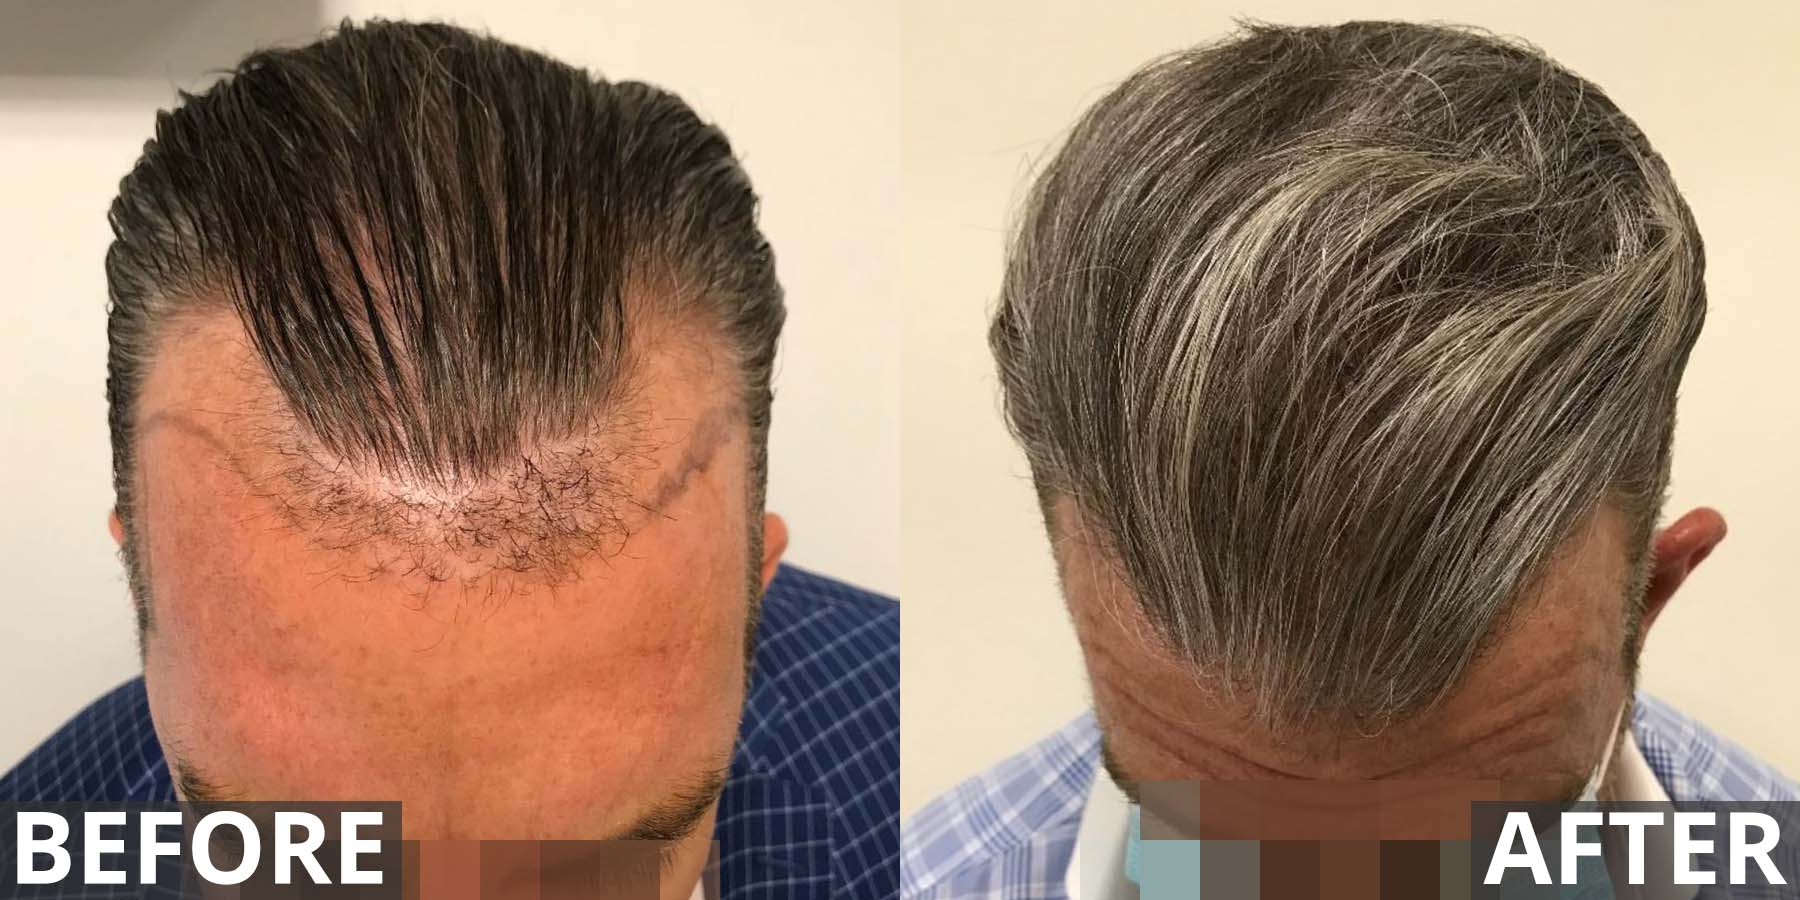 Hair transplant before and after gallery